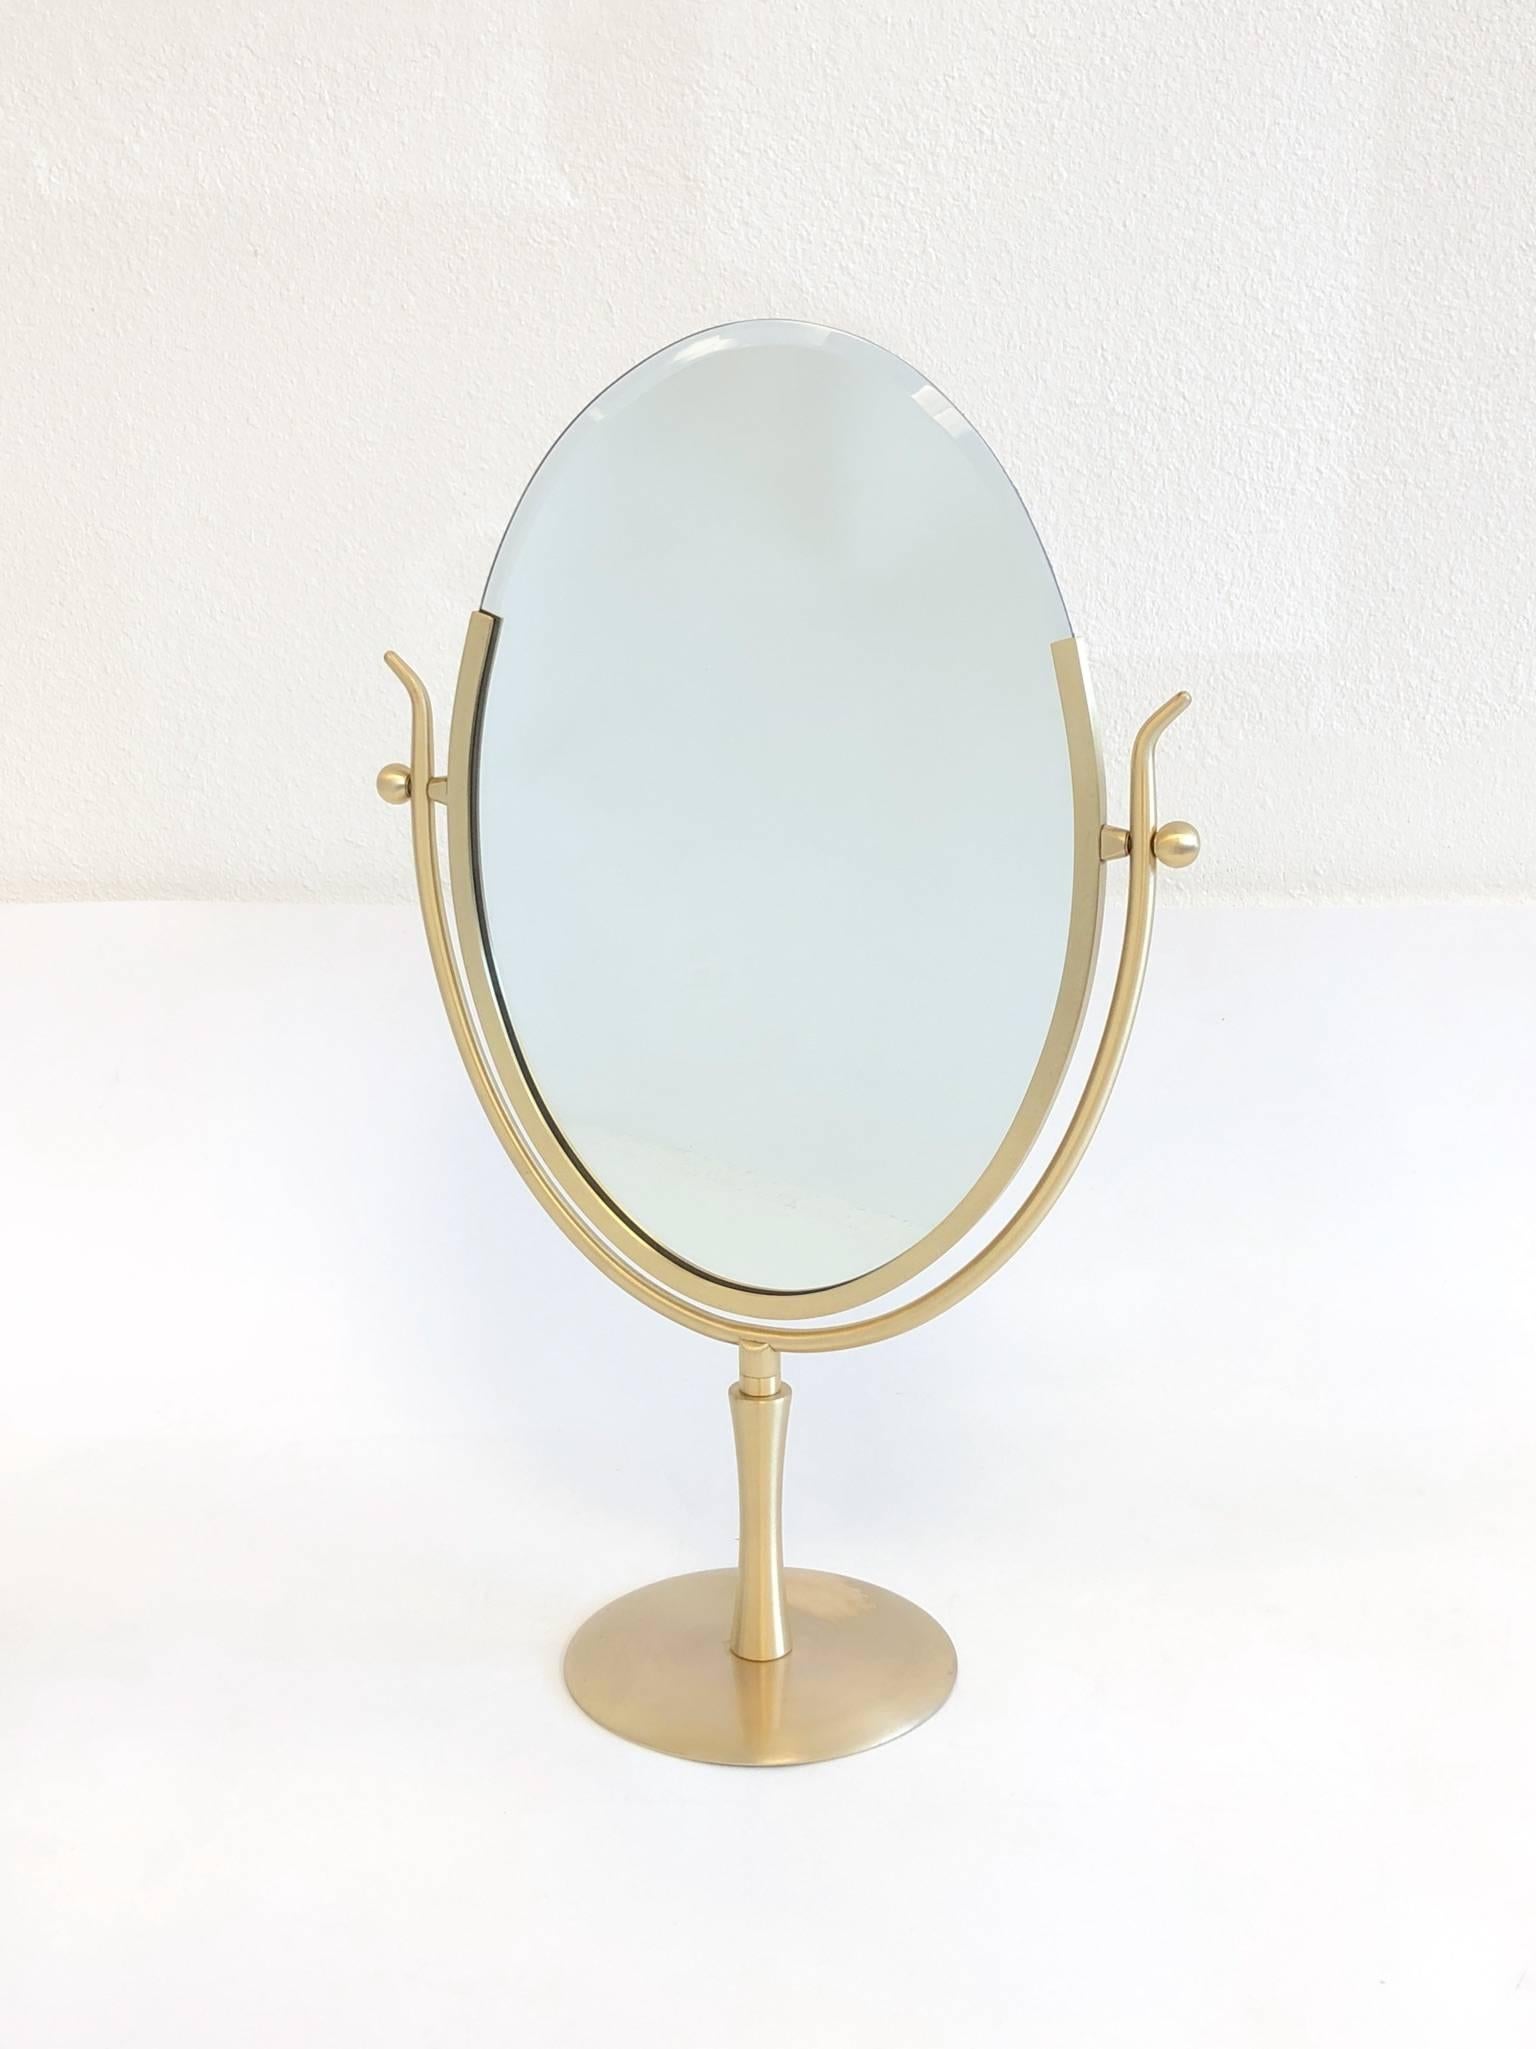 A glamorous 1970s large satin brass “Wishbone” vanity mirror by renowned America designer Charles Hollis Jones. Newly restored. The back of the mirror is covered with a light brown shagreen embossed leather. The mirror is signed by CHJ.
Dimensions: